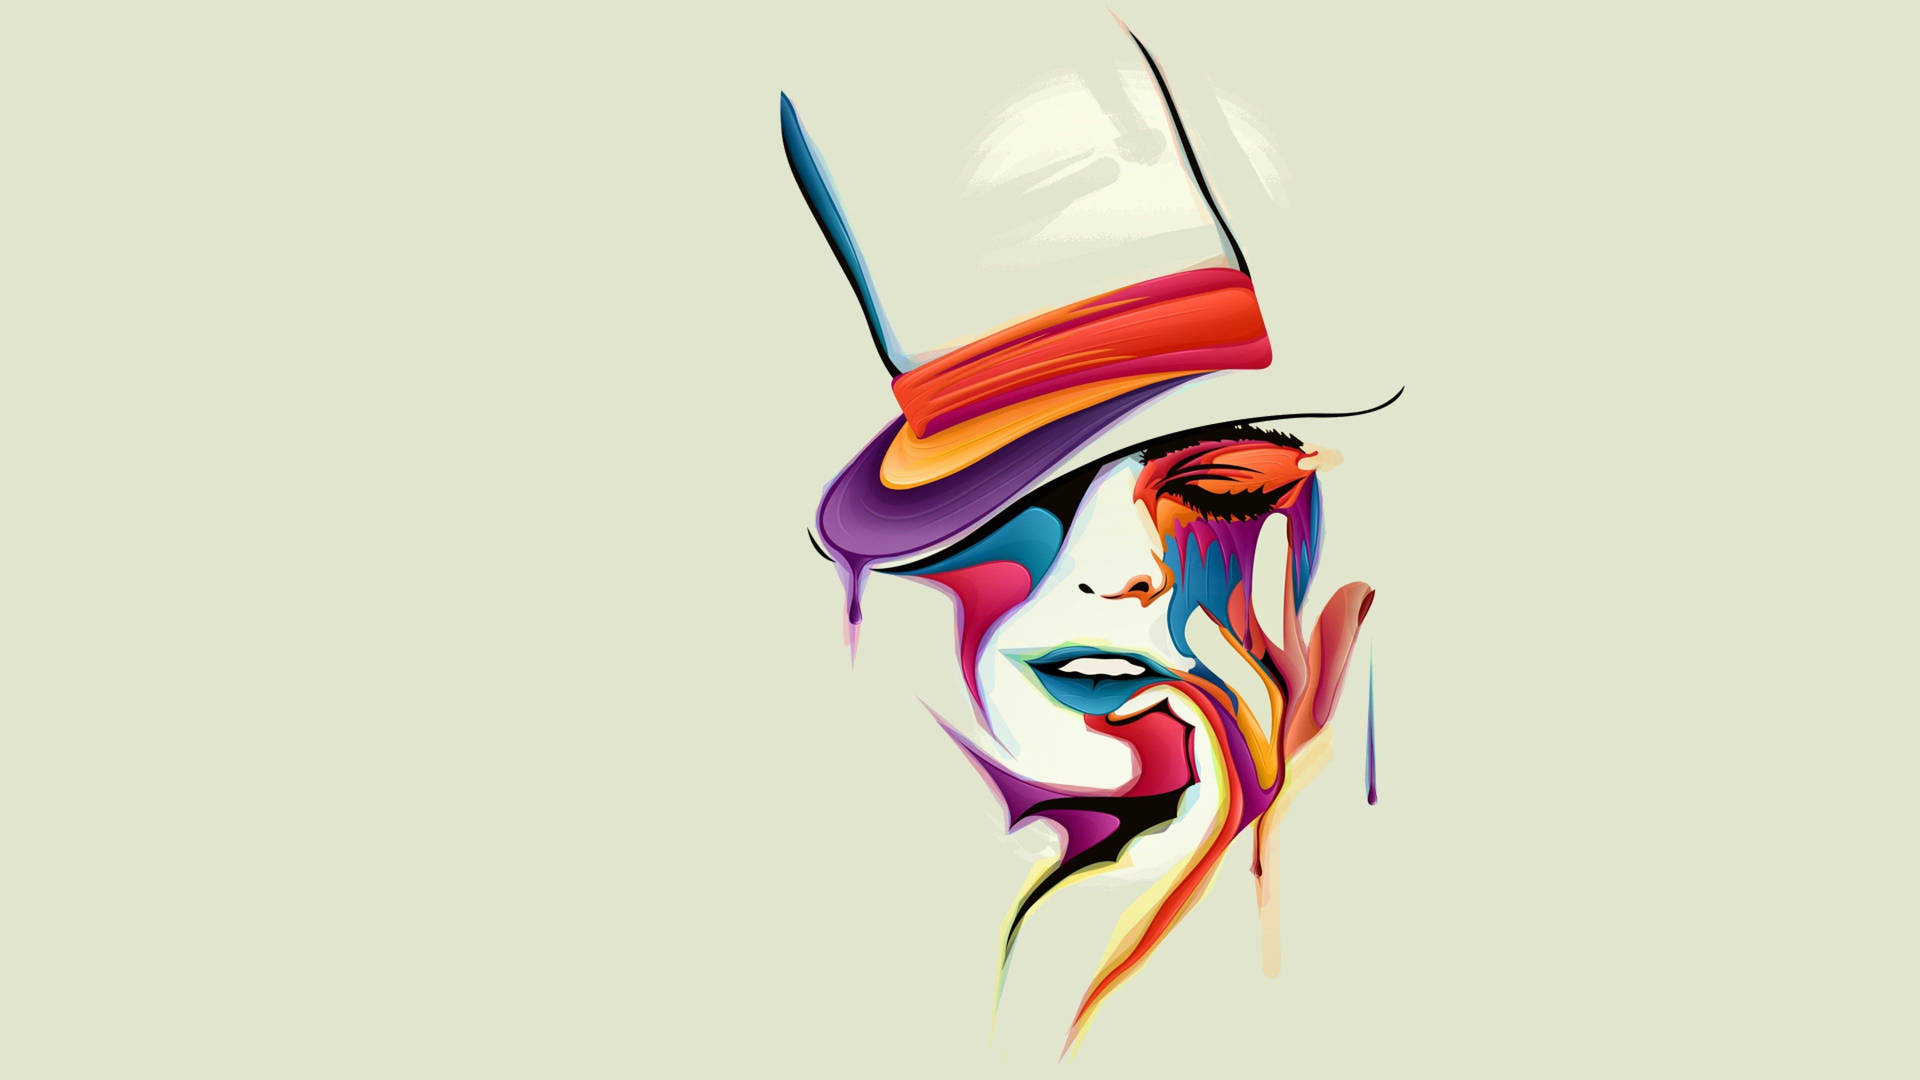 Colorful Woman's Face Illustration Background